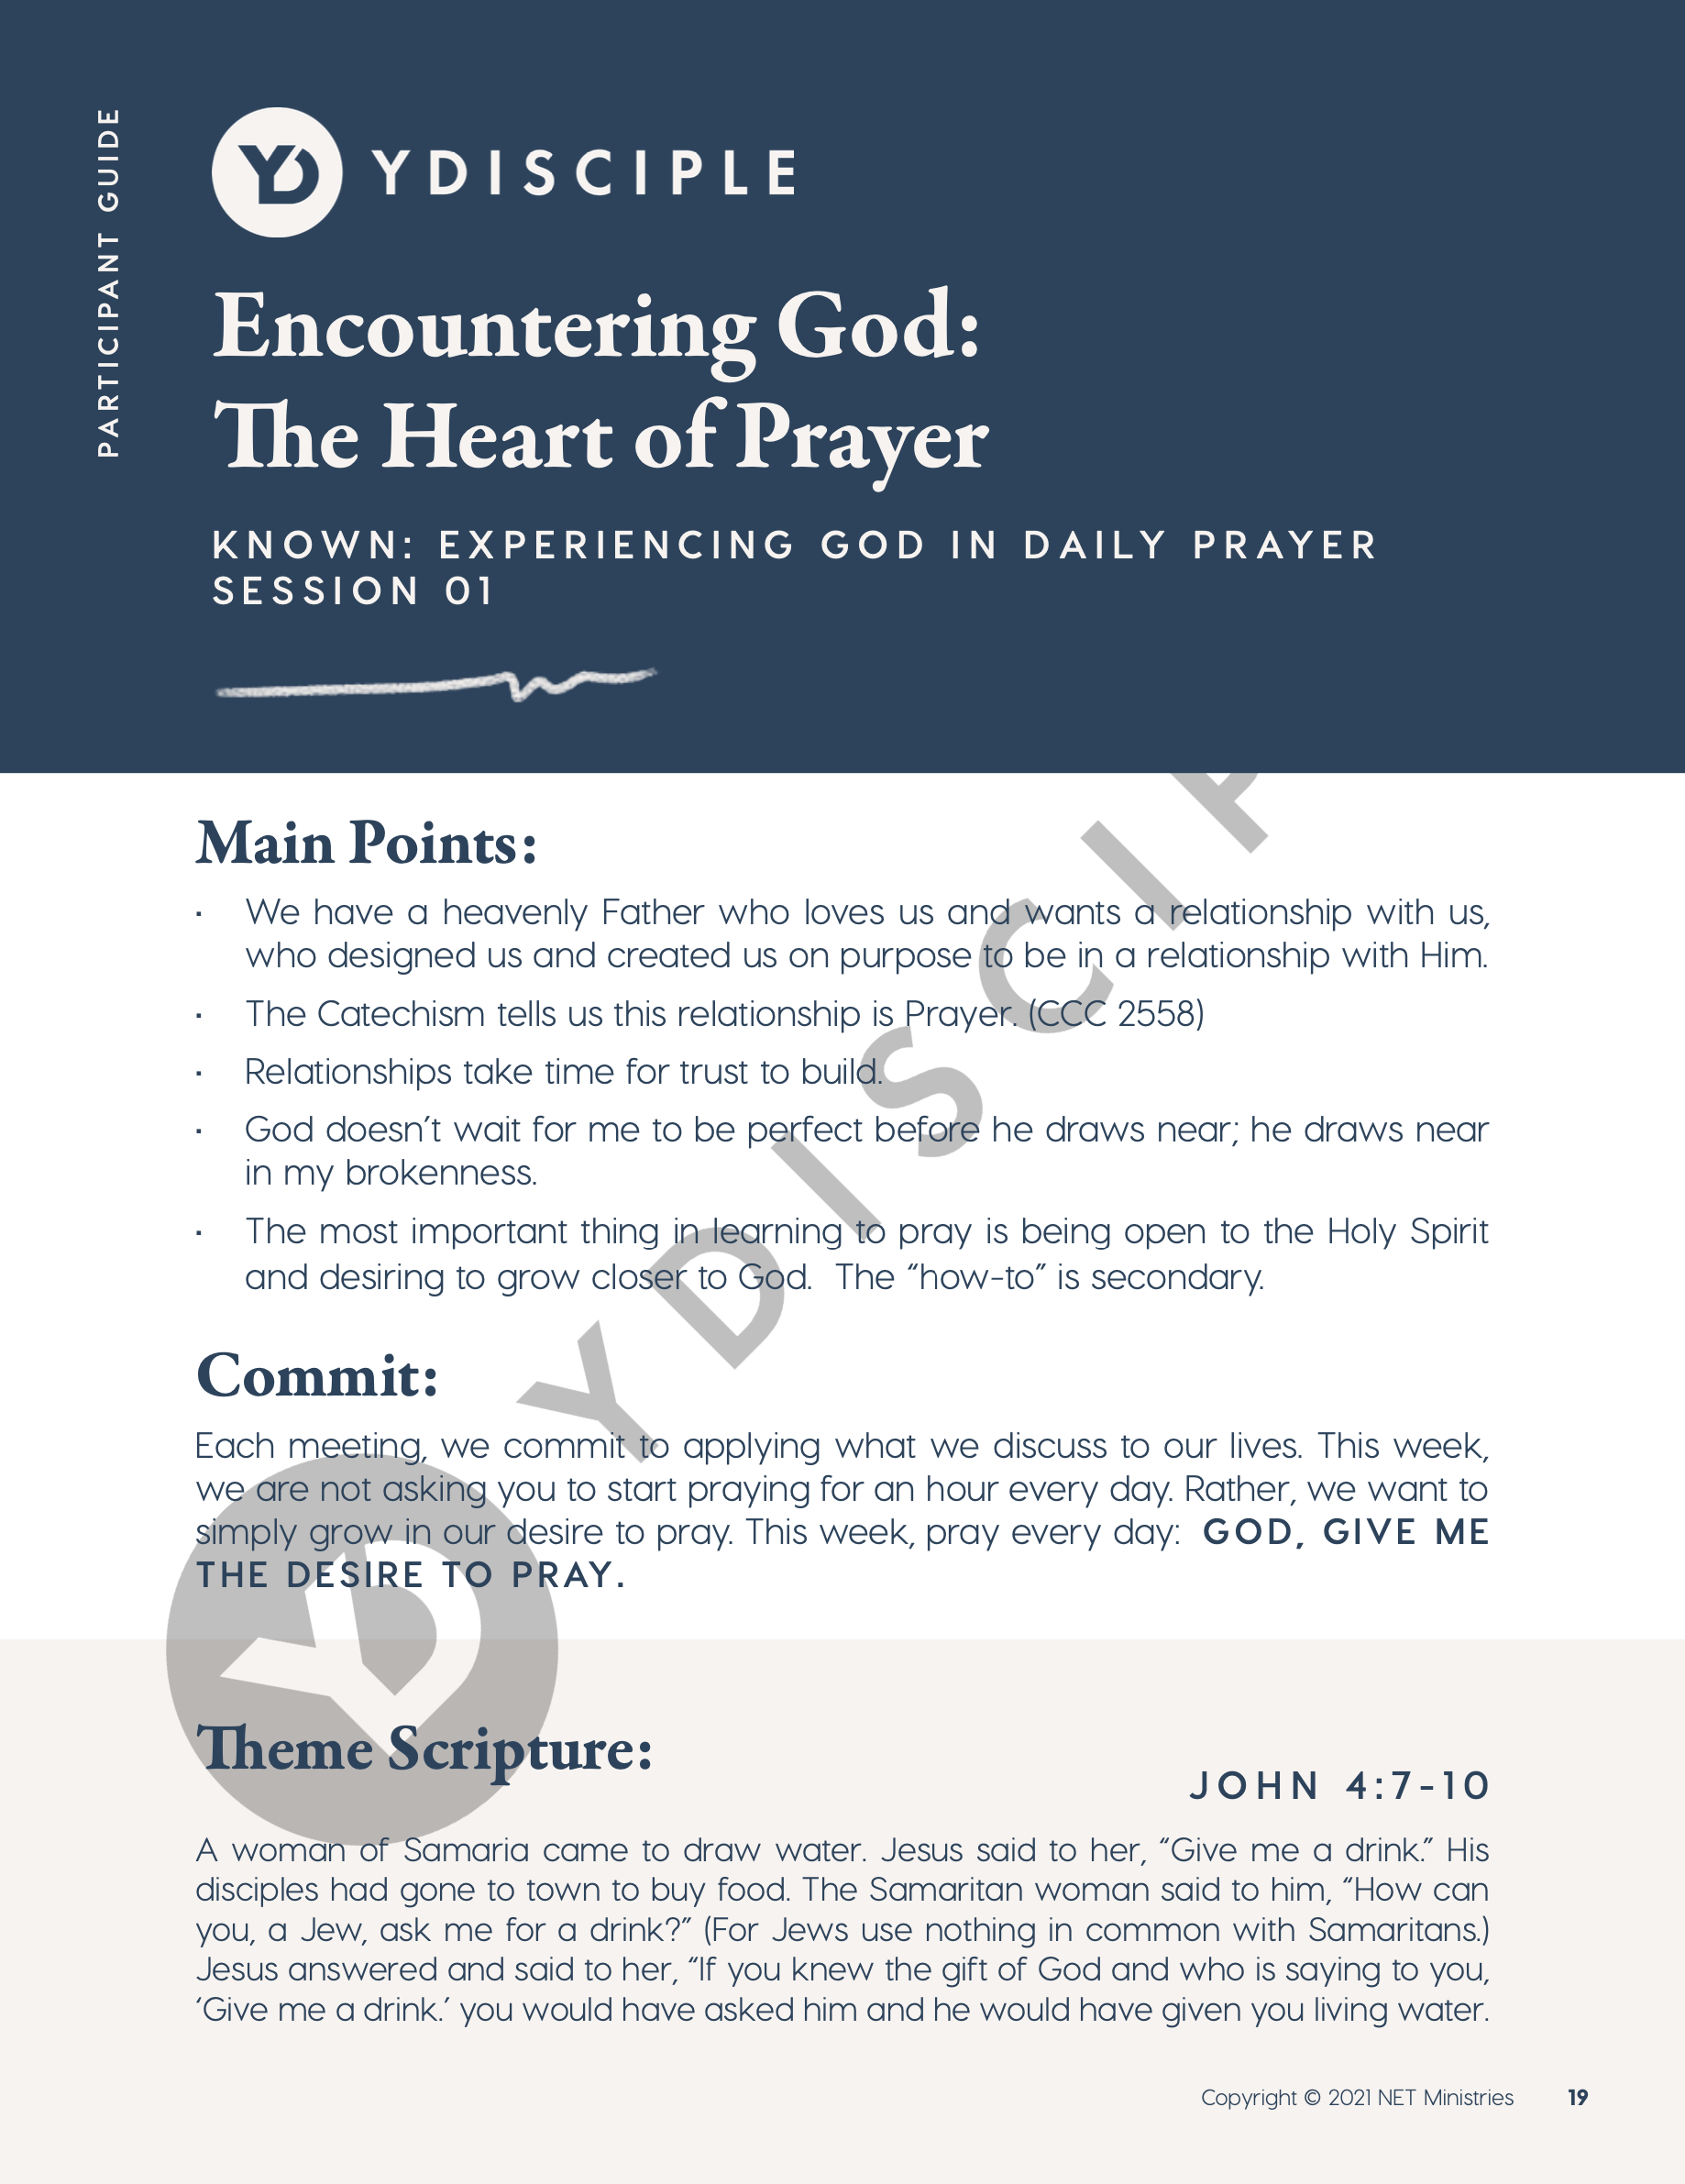 Known: Experiencing God in Daily Prayer (DVD & Book Set)